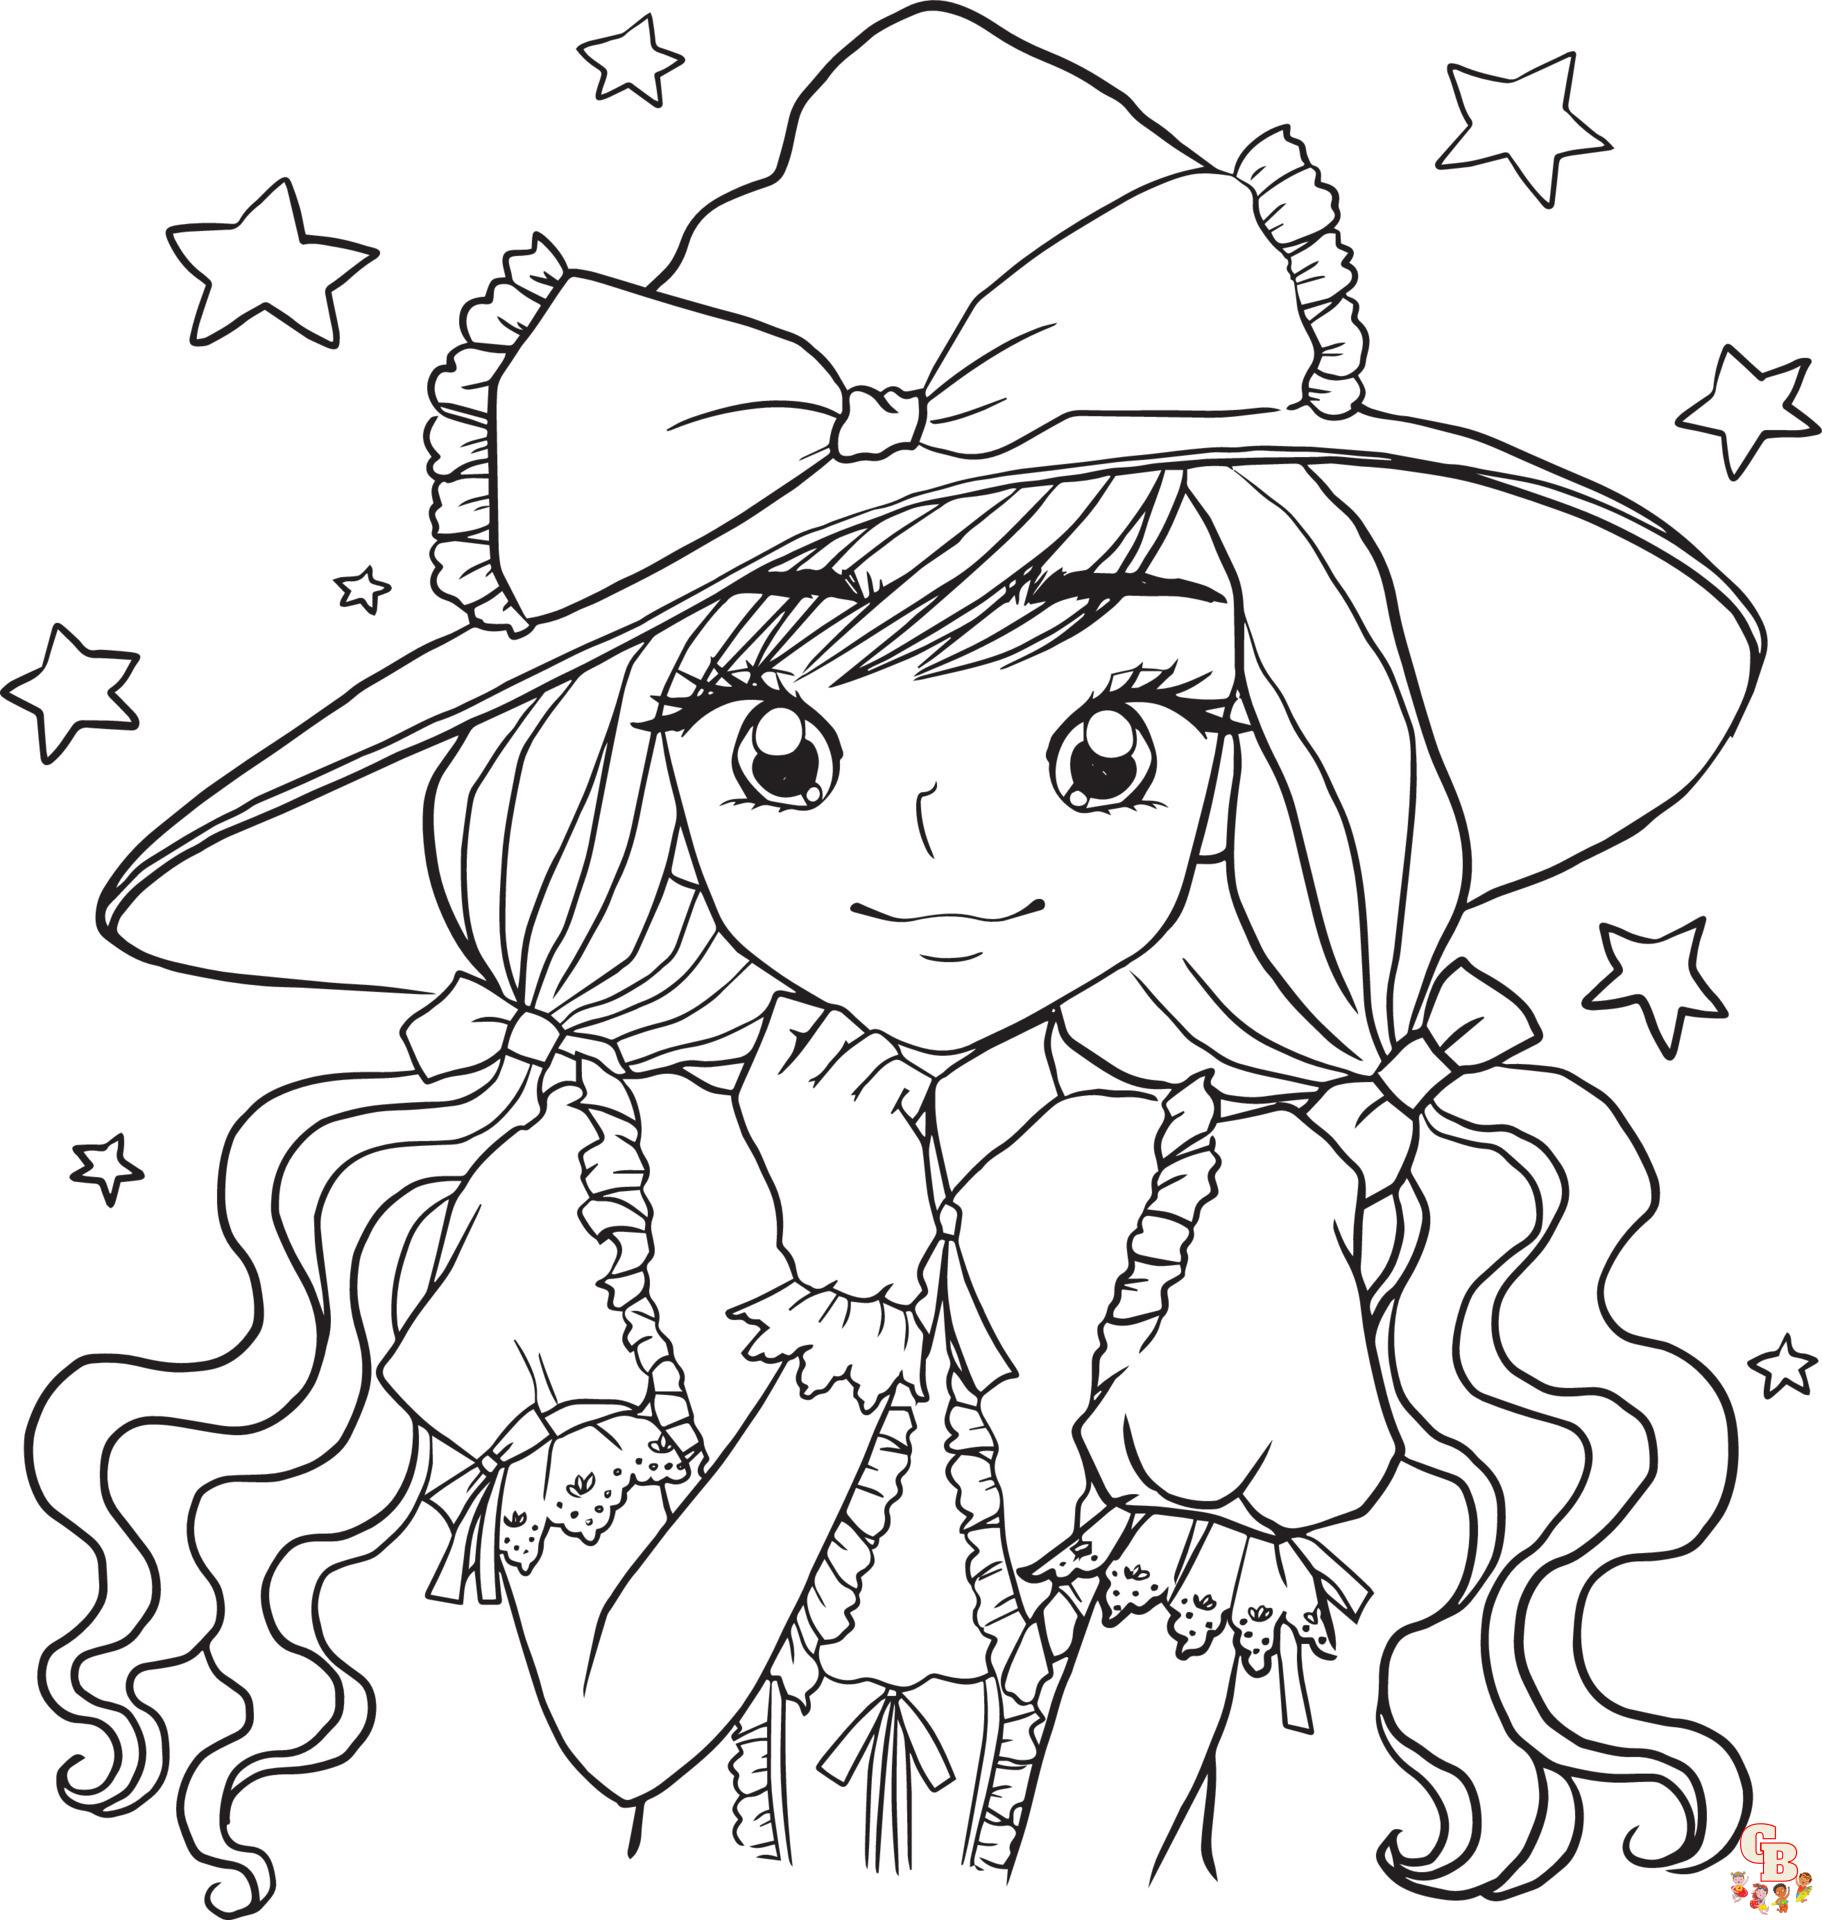 Merry Christmas and Happy New Year coloring page | Free Printable Coloring  Pages